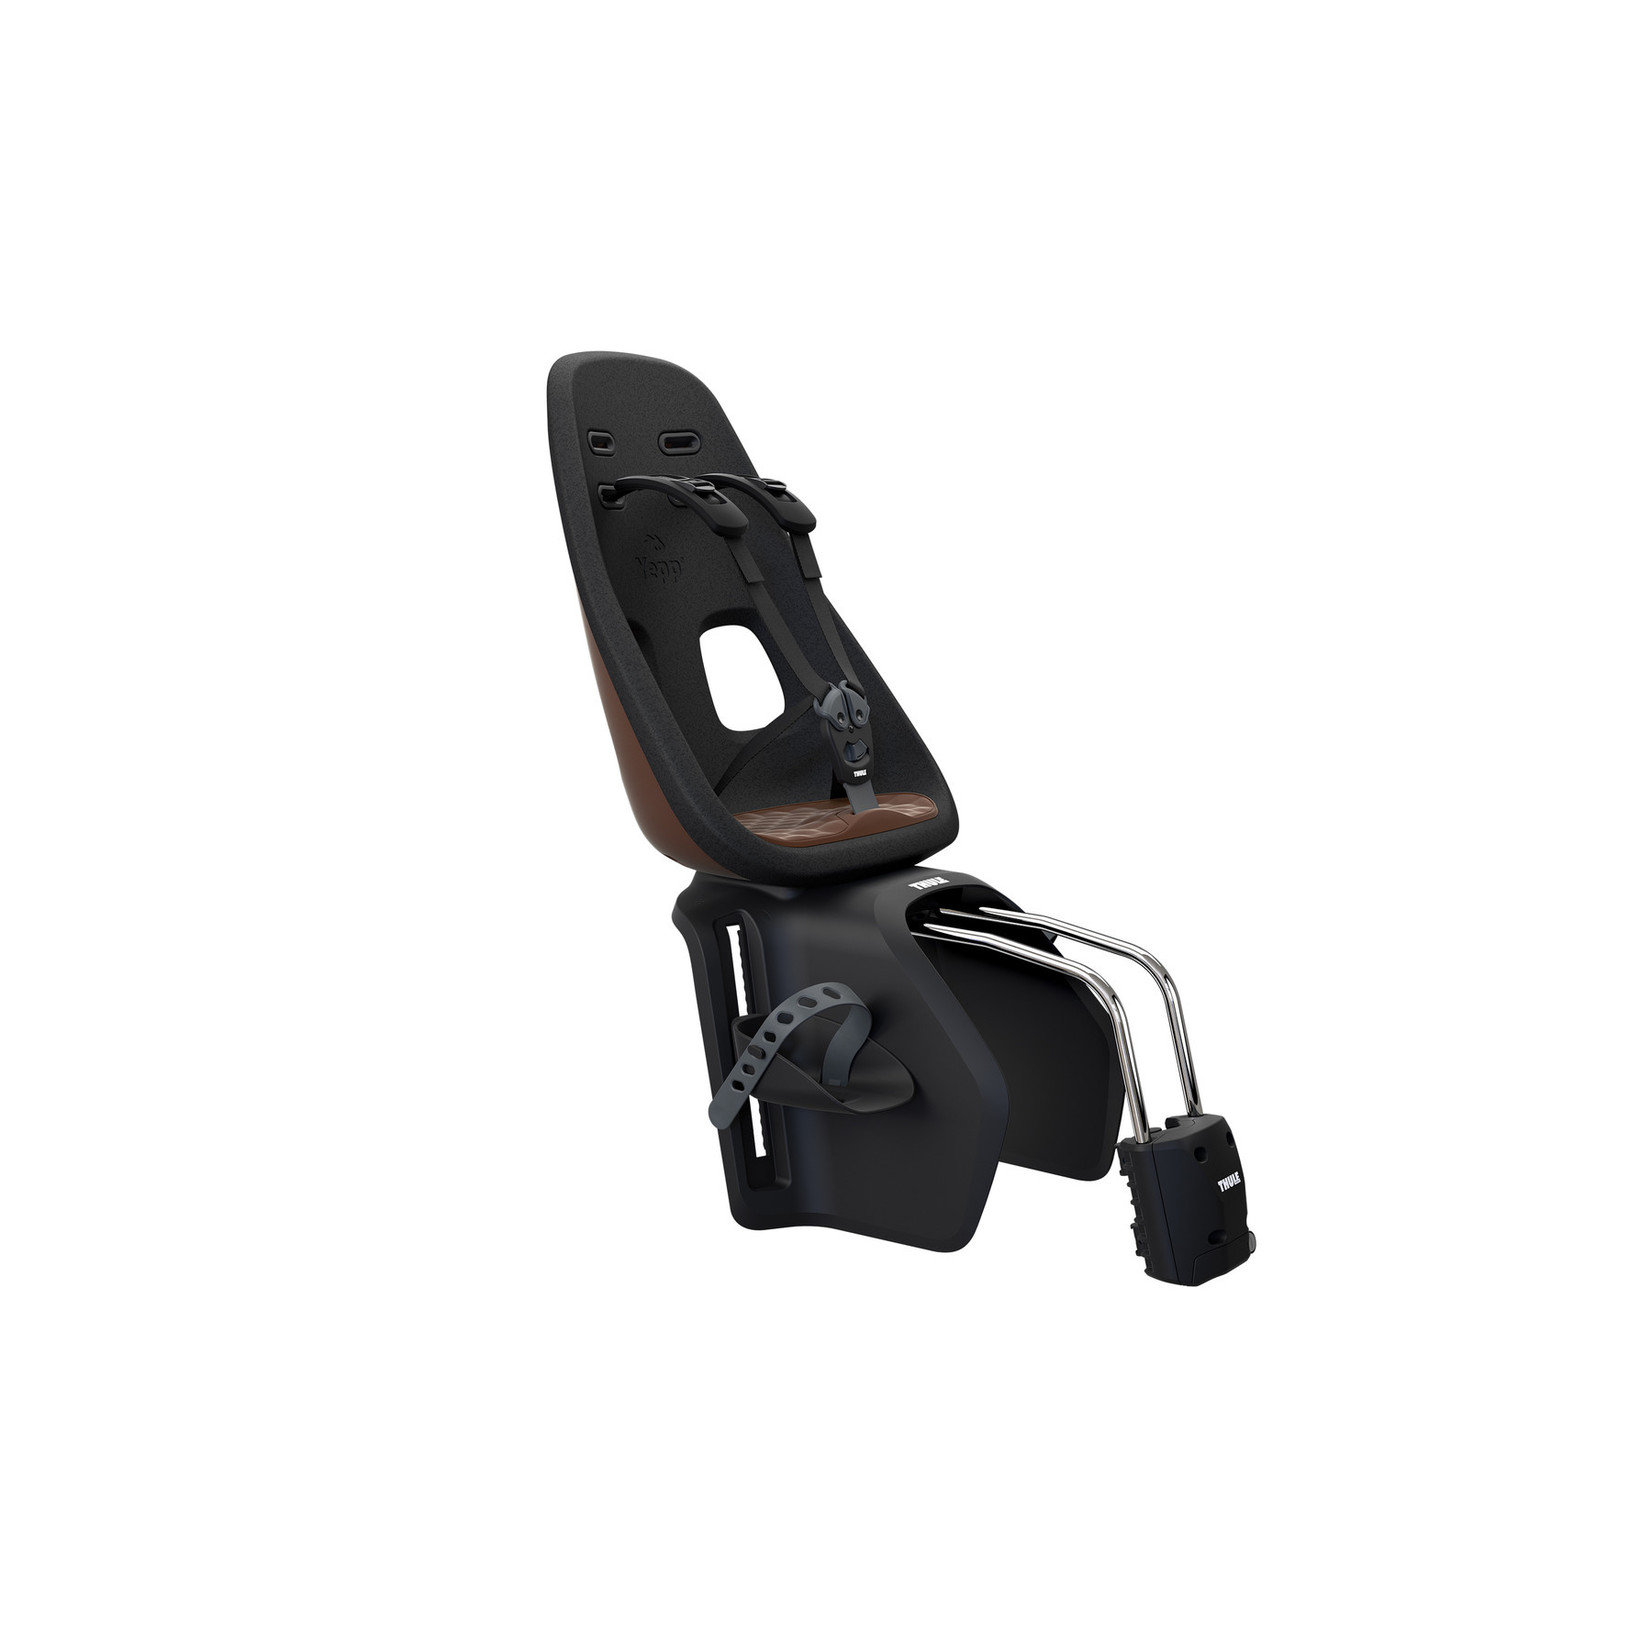 Thule Thule Yepp Nexxt Maxi Rear Frame Mounted Child Seat 12080226 - Chocolate Brown